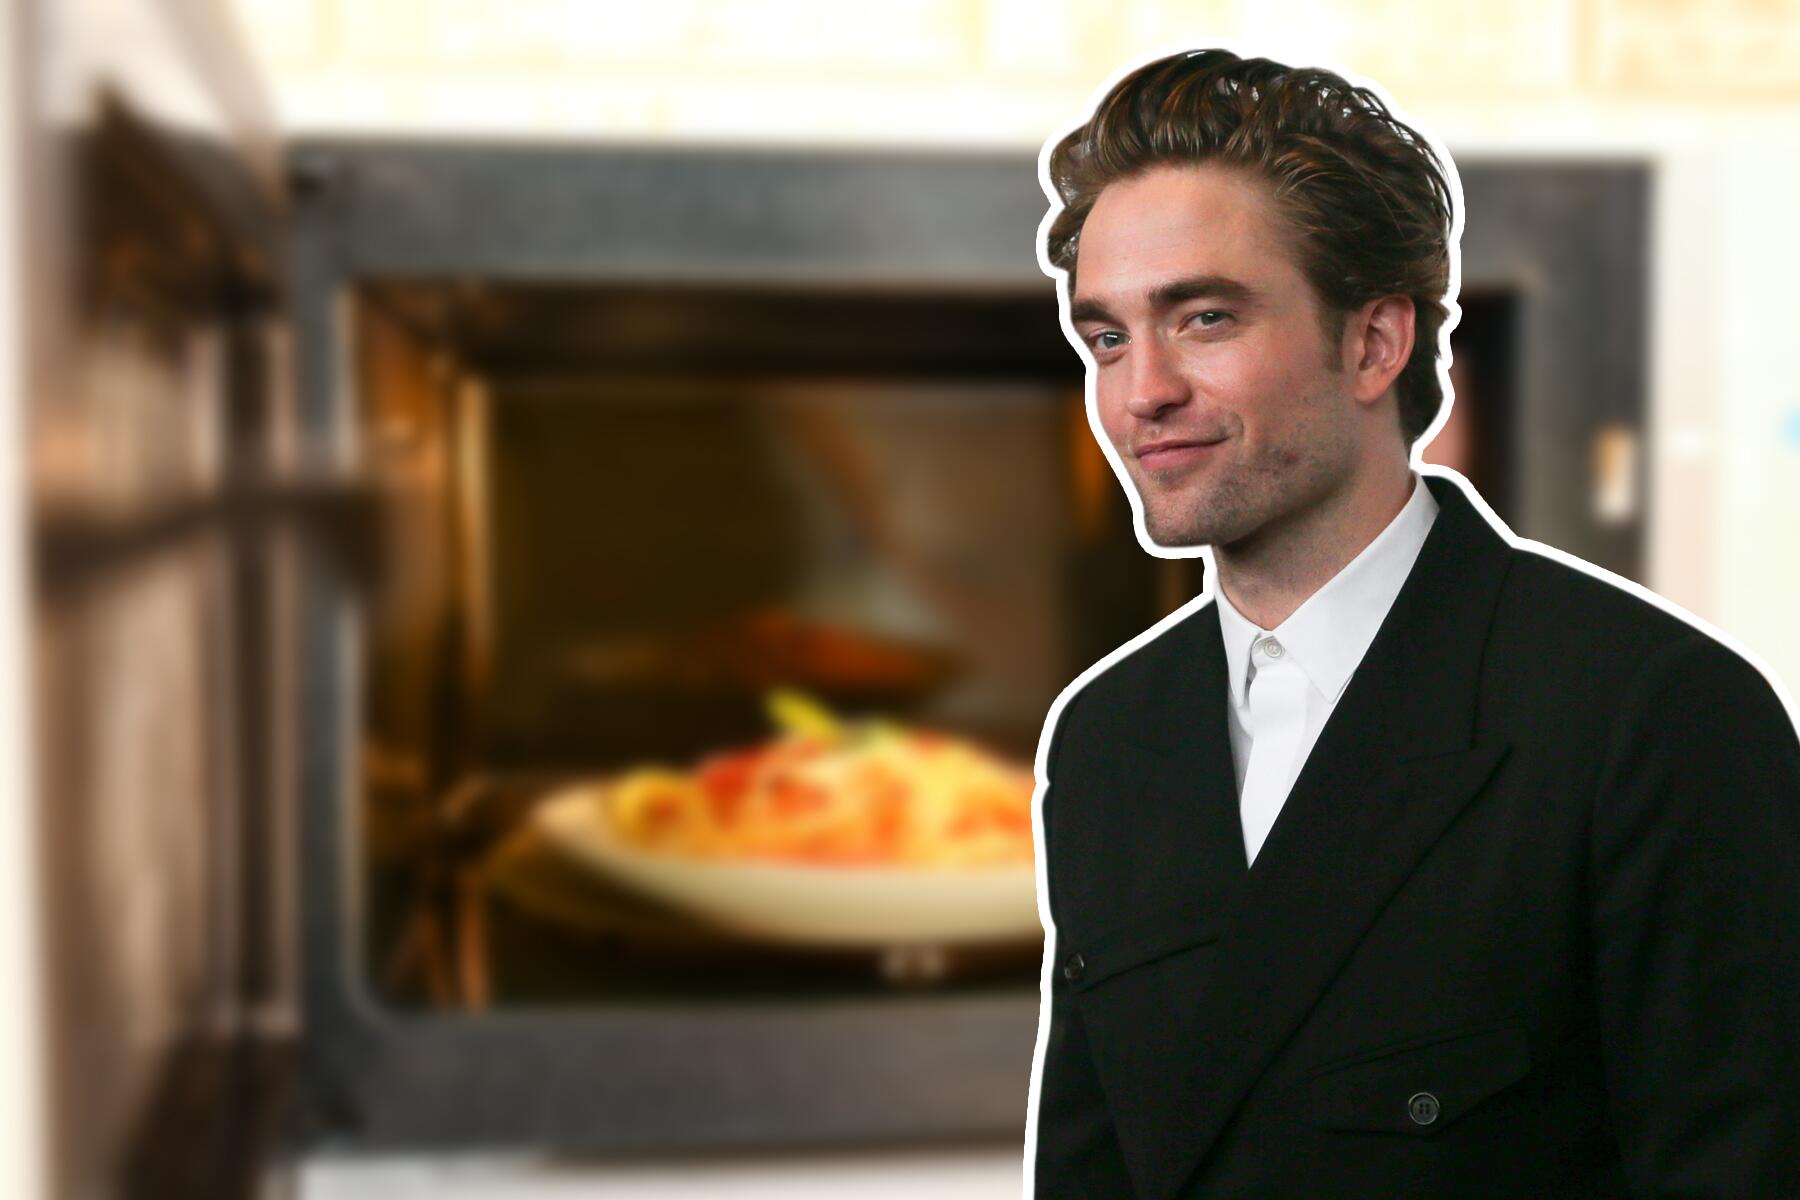 Celebrities dish on their favorite recipes